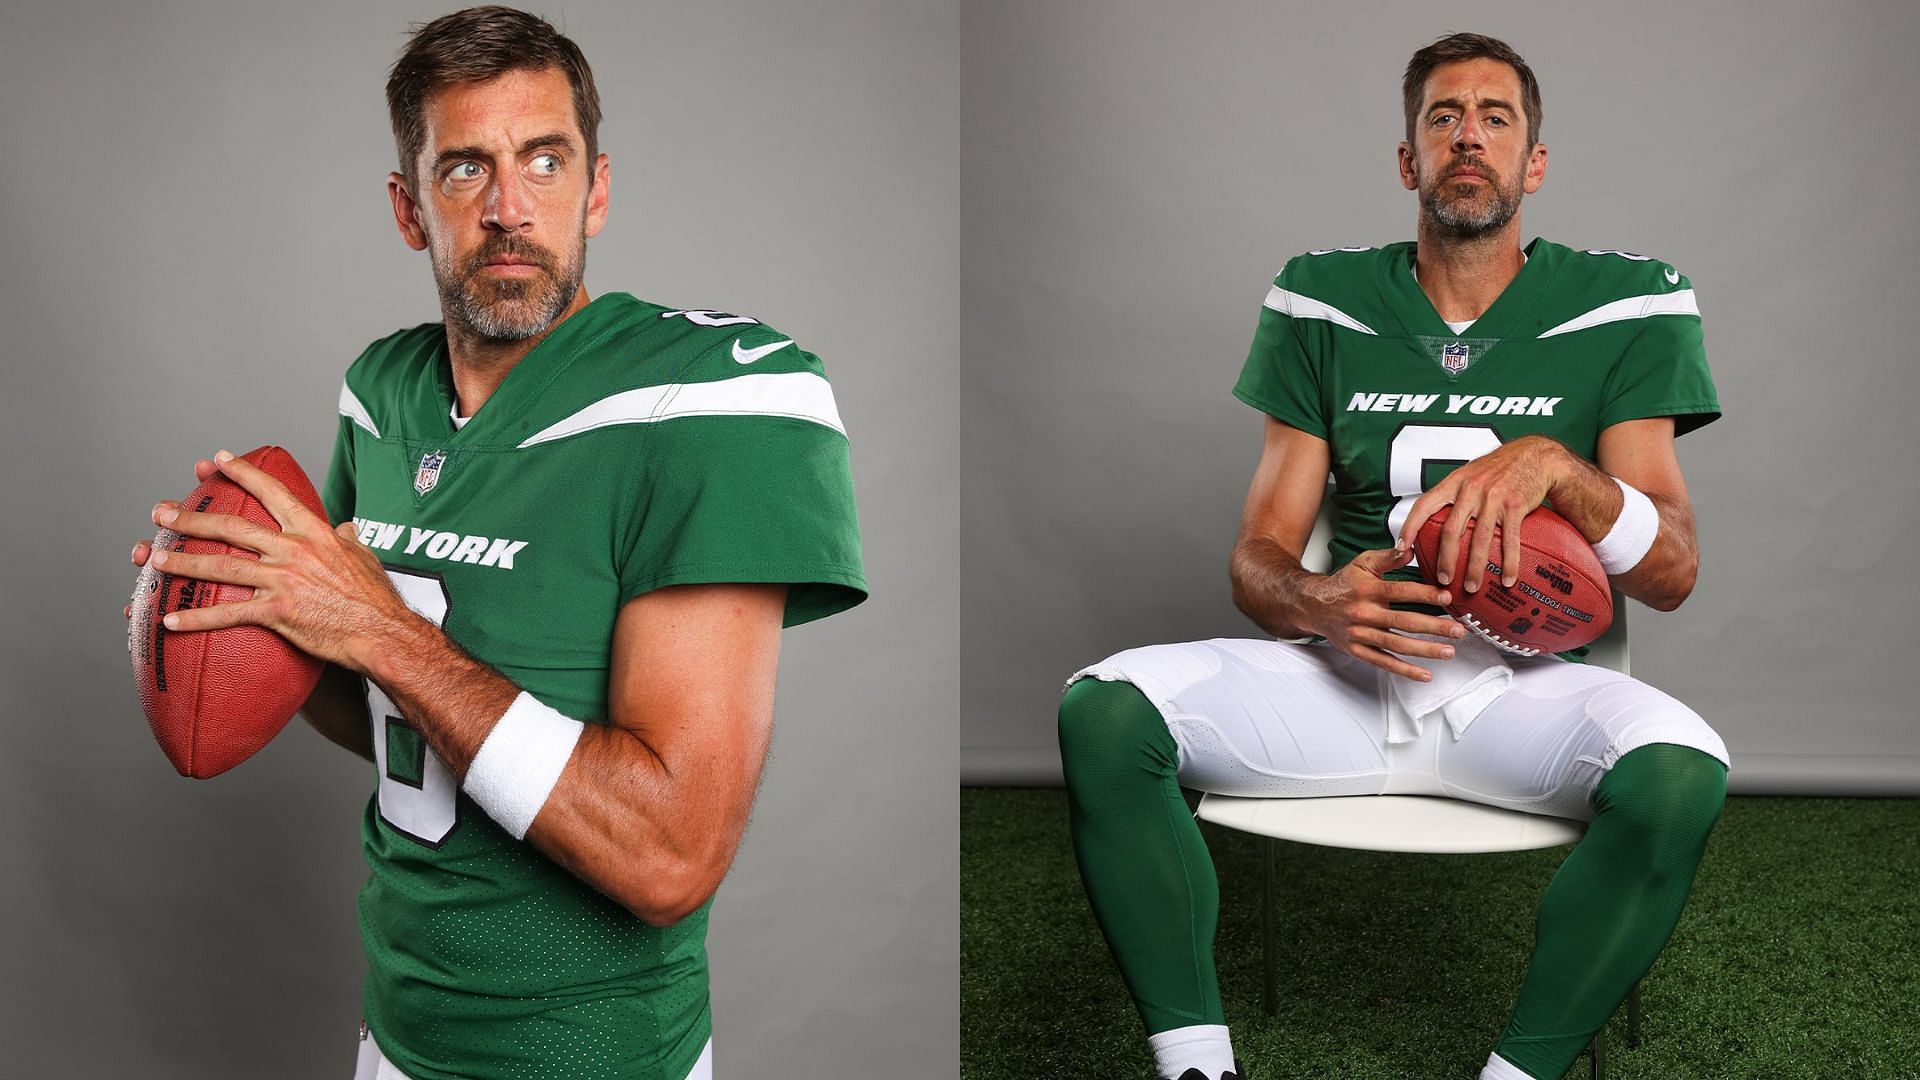 Aaron Rodgers&rsquo; photoshoot while wearing the New York Jets uniform. (Image credit: NFL on Twitter)